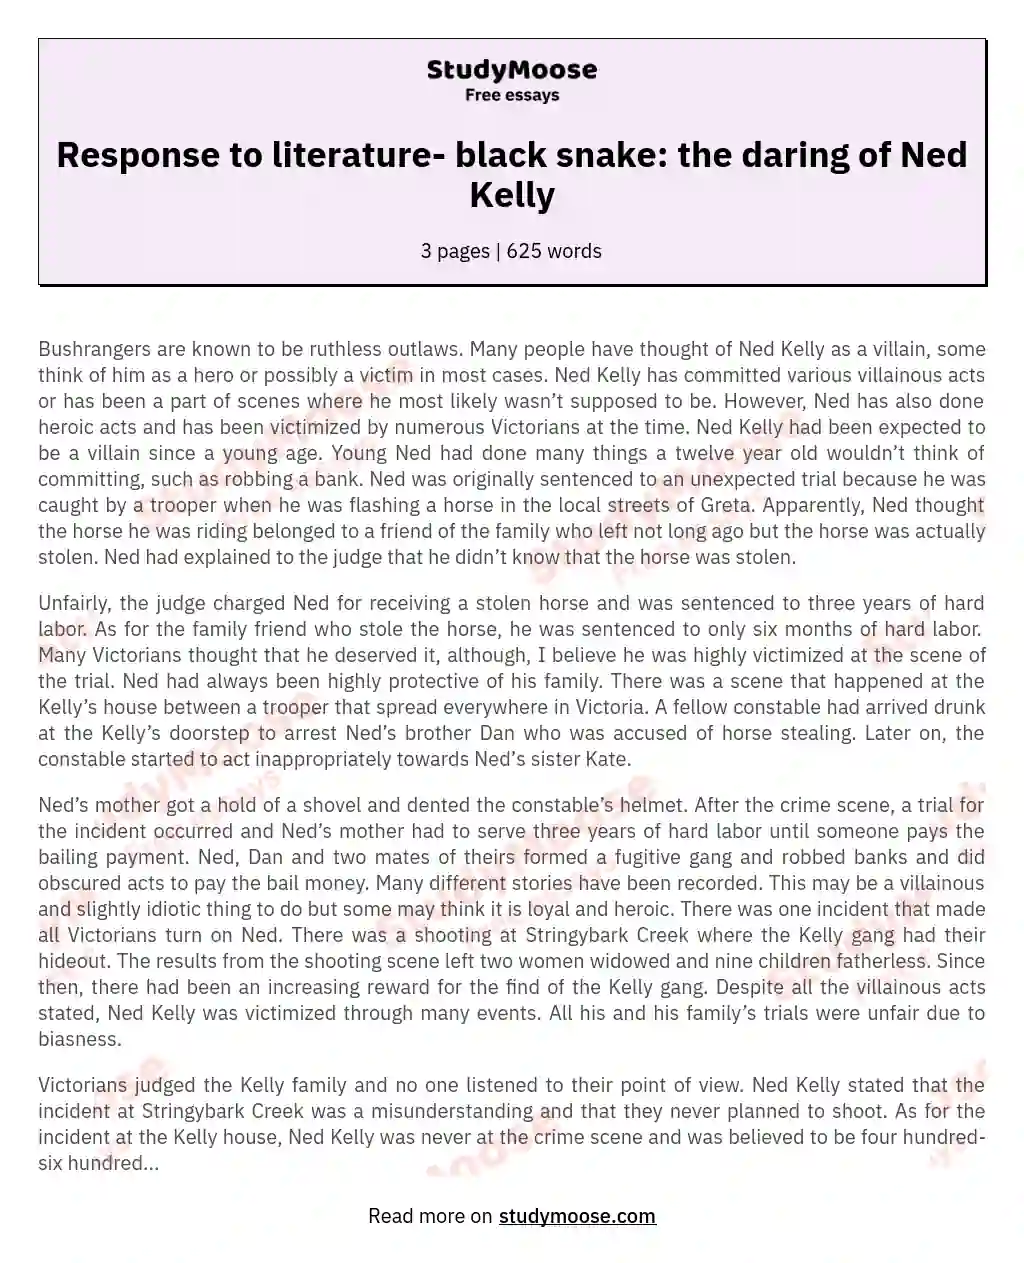 Response to literature- black snake: the daring of Ned Kelly